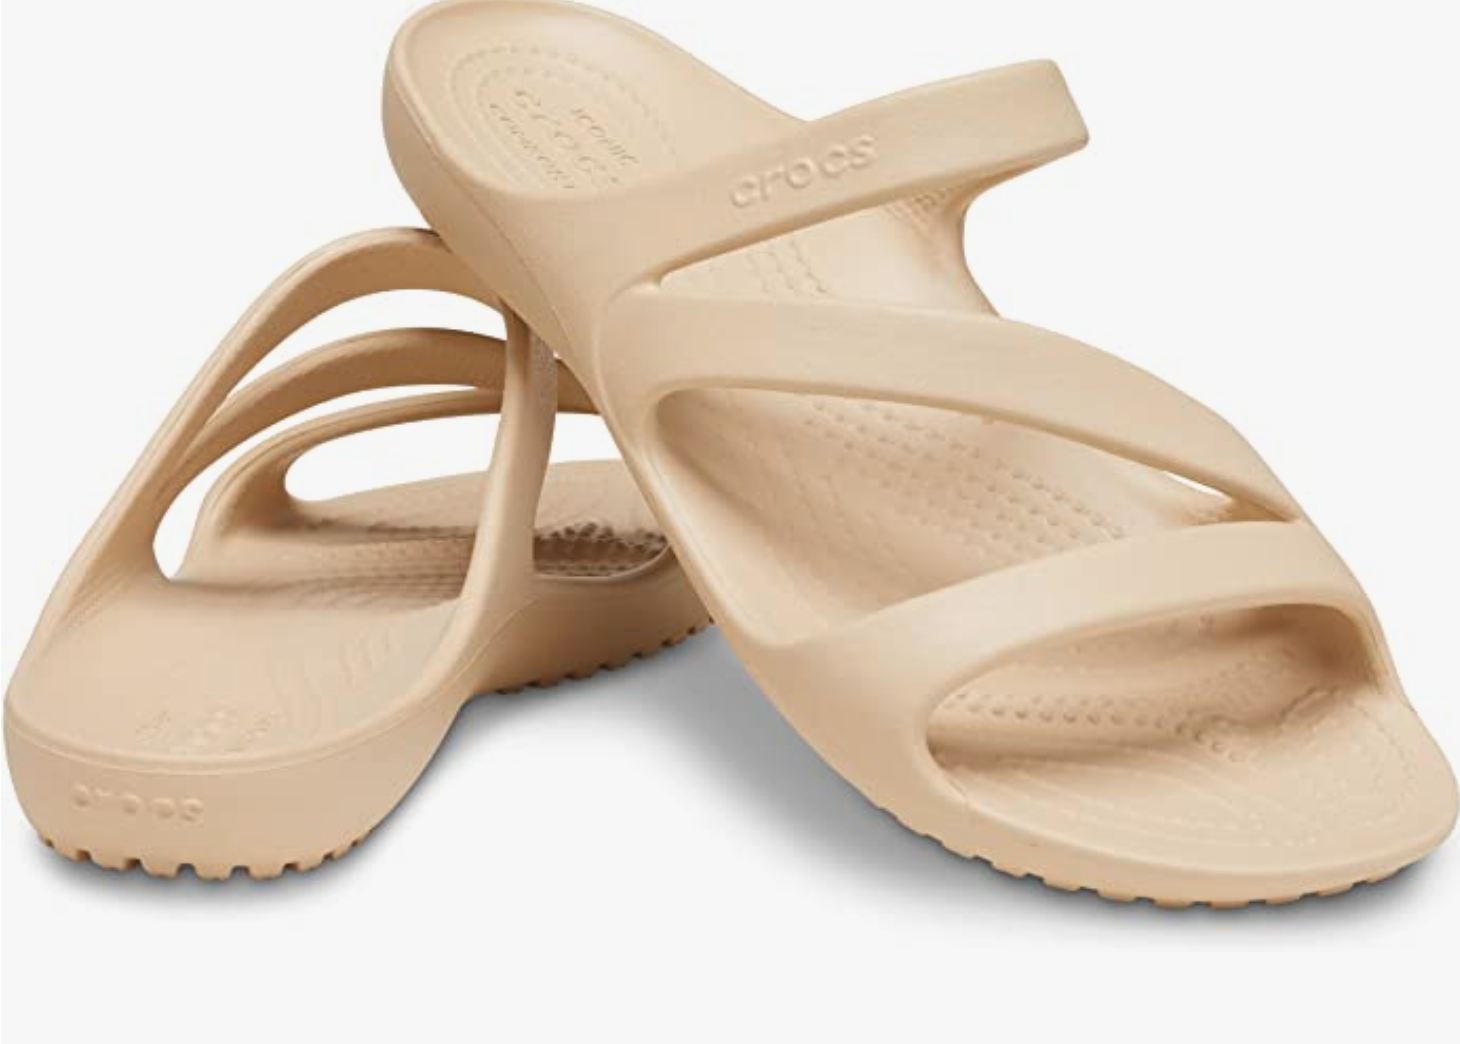 Best comfortable women's sandals for traveling